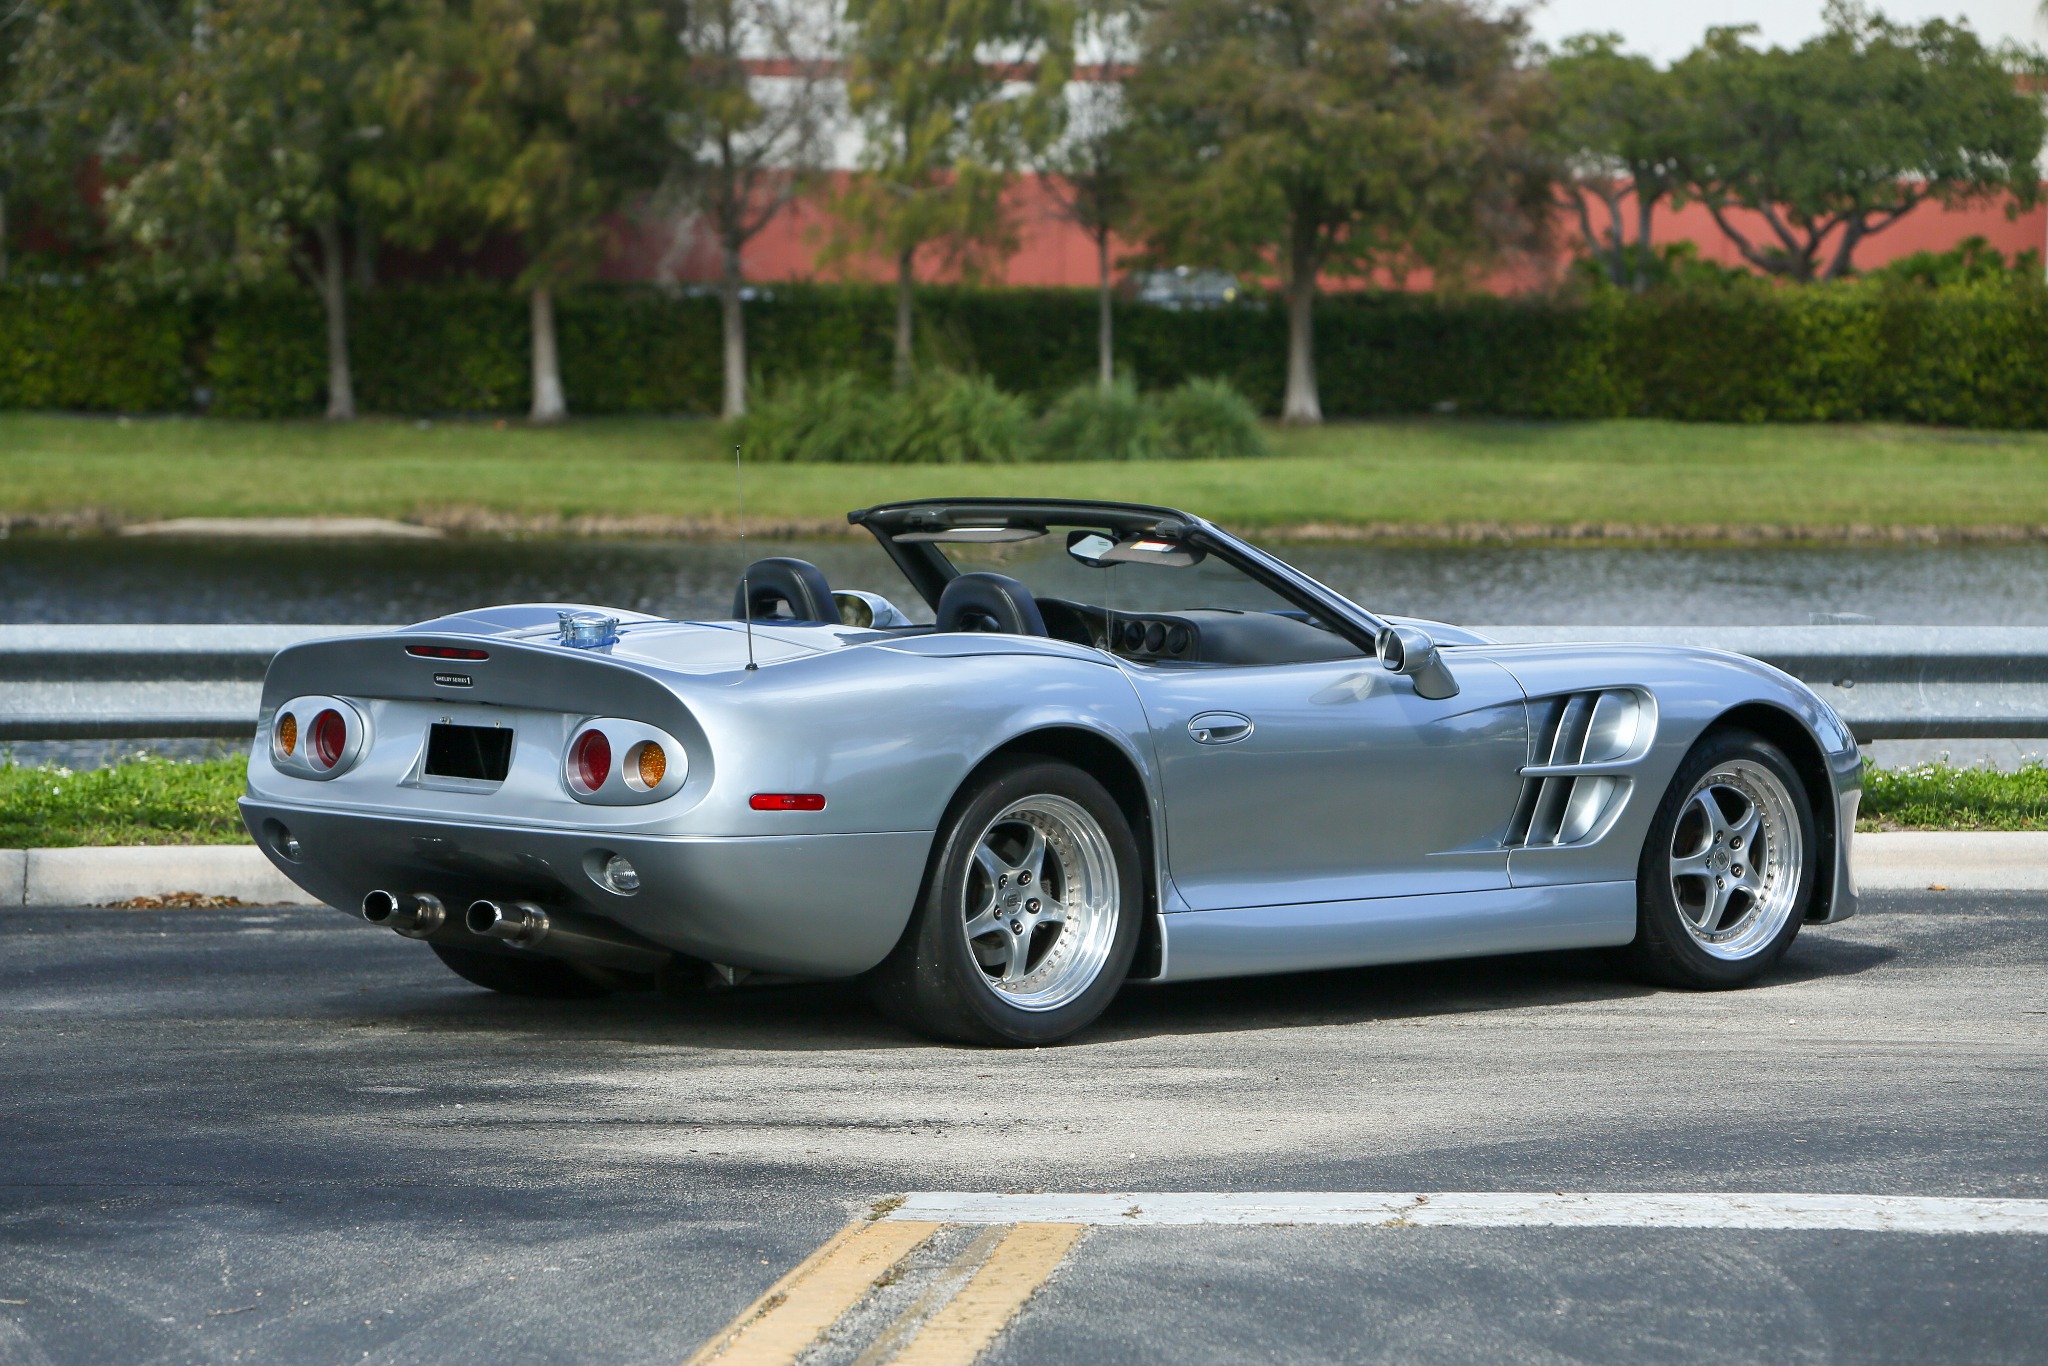 Shelby Series One sports car